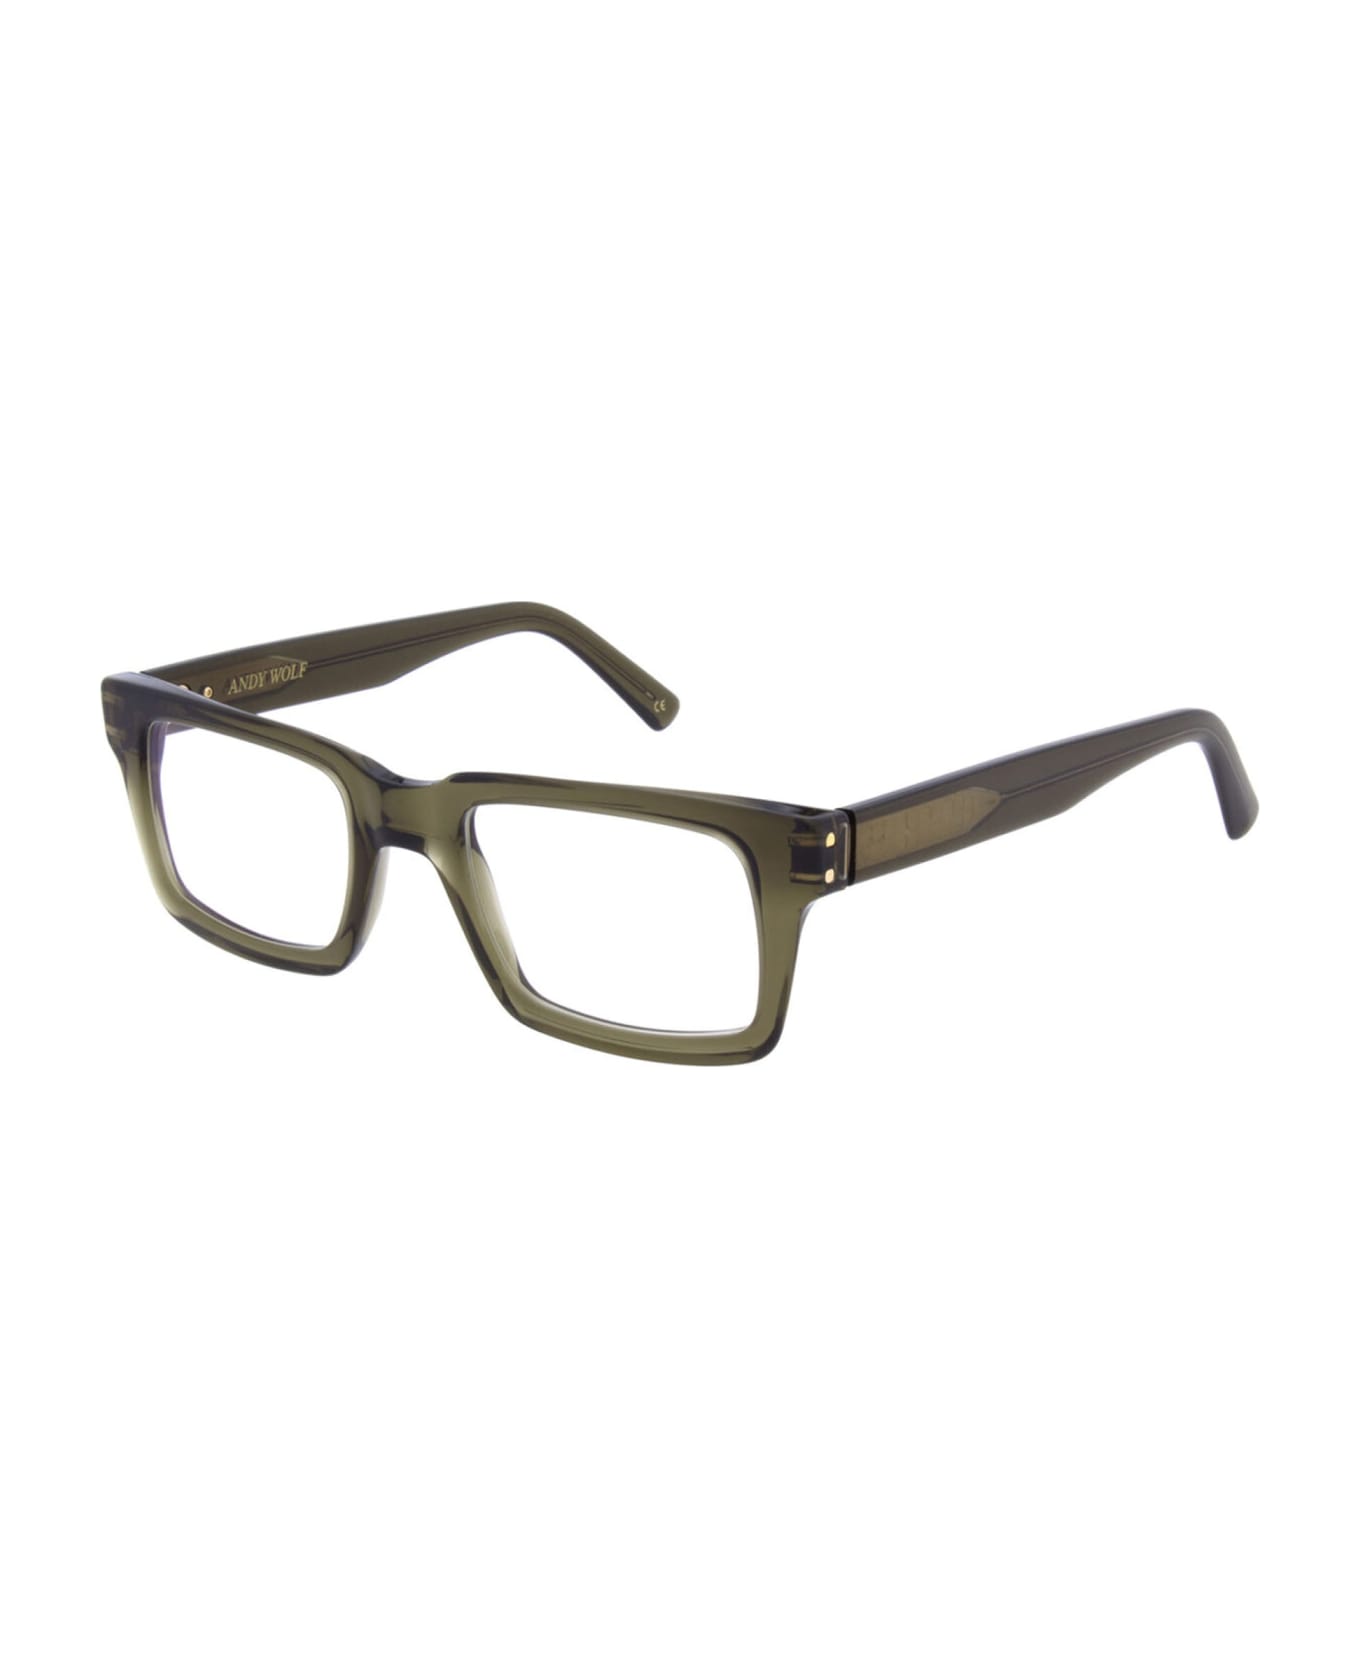 Andy Wolf Aw04 - Green Glasses - green